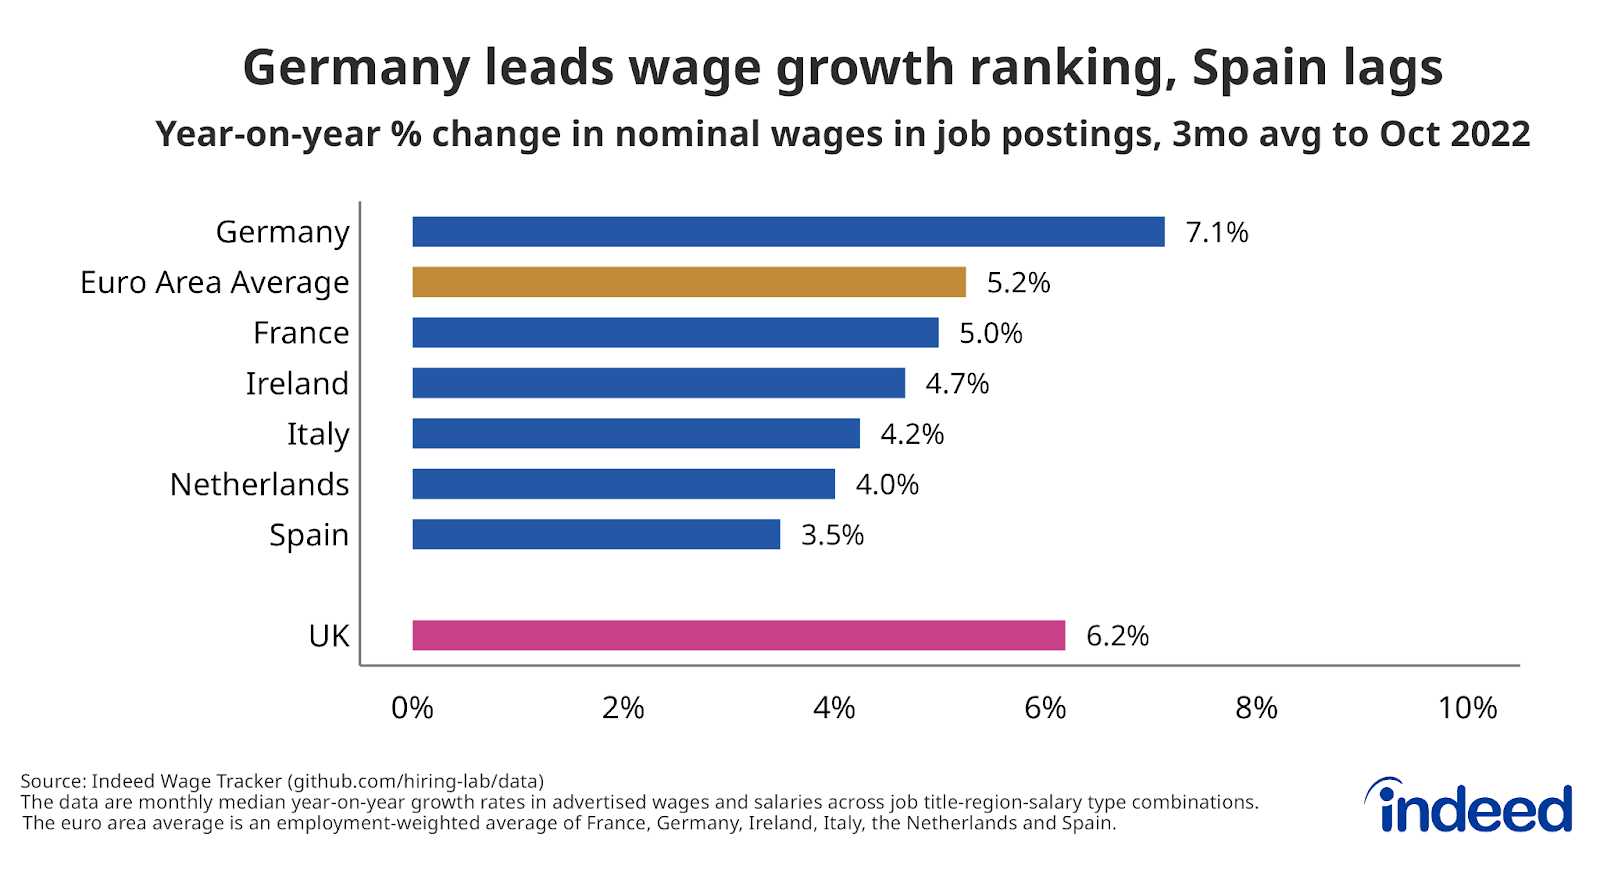 Bar graph titled "Germany leads wage growth ranking, Spain lags." 